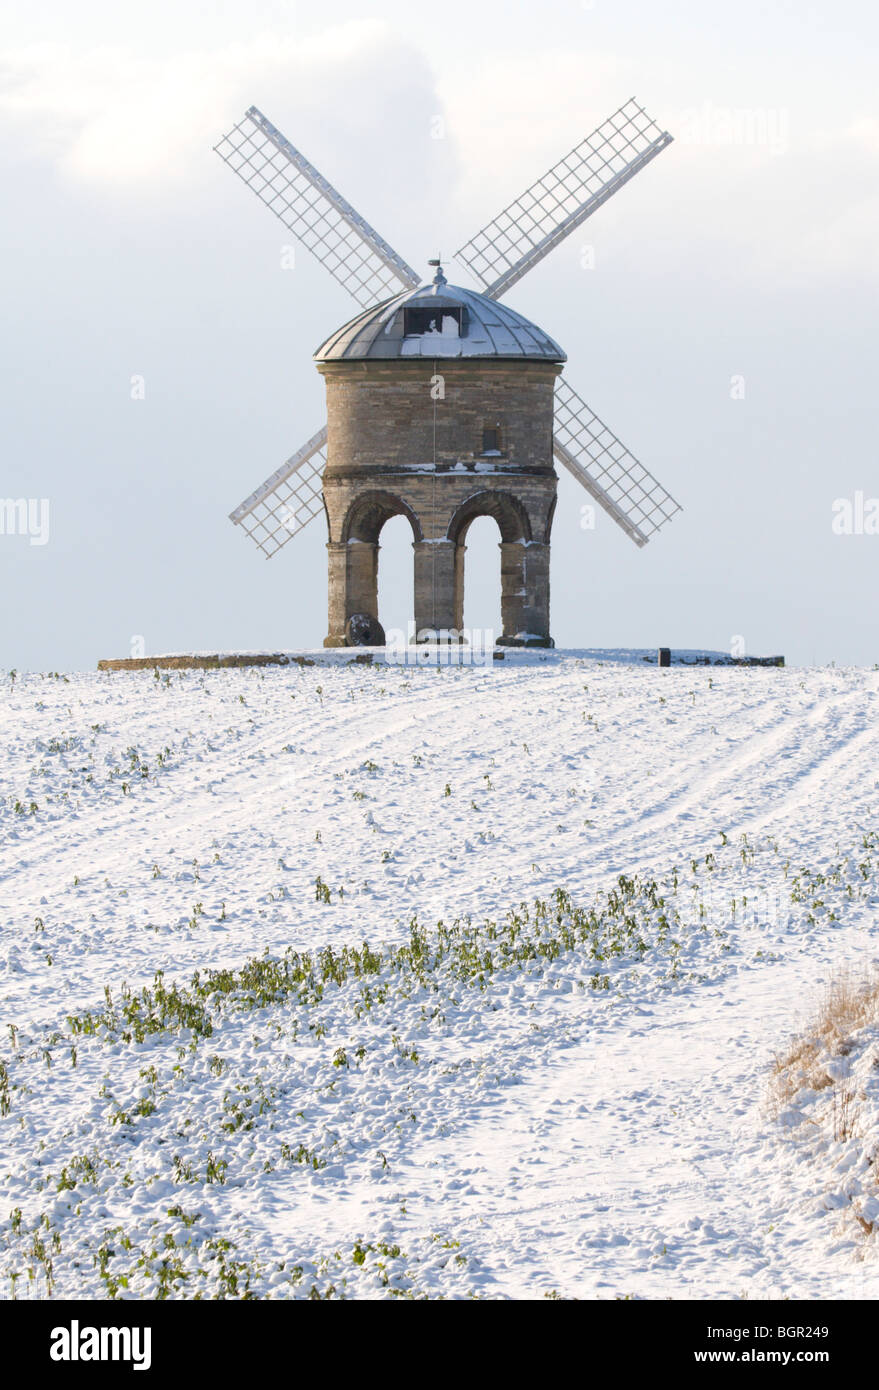 A portrait image of Chesterton Windmill in Warwickshire with snow on the ground and a cloudy sky behind Stock Photo